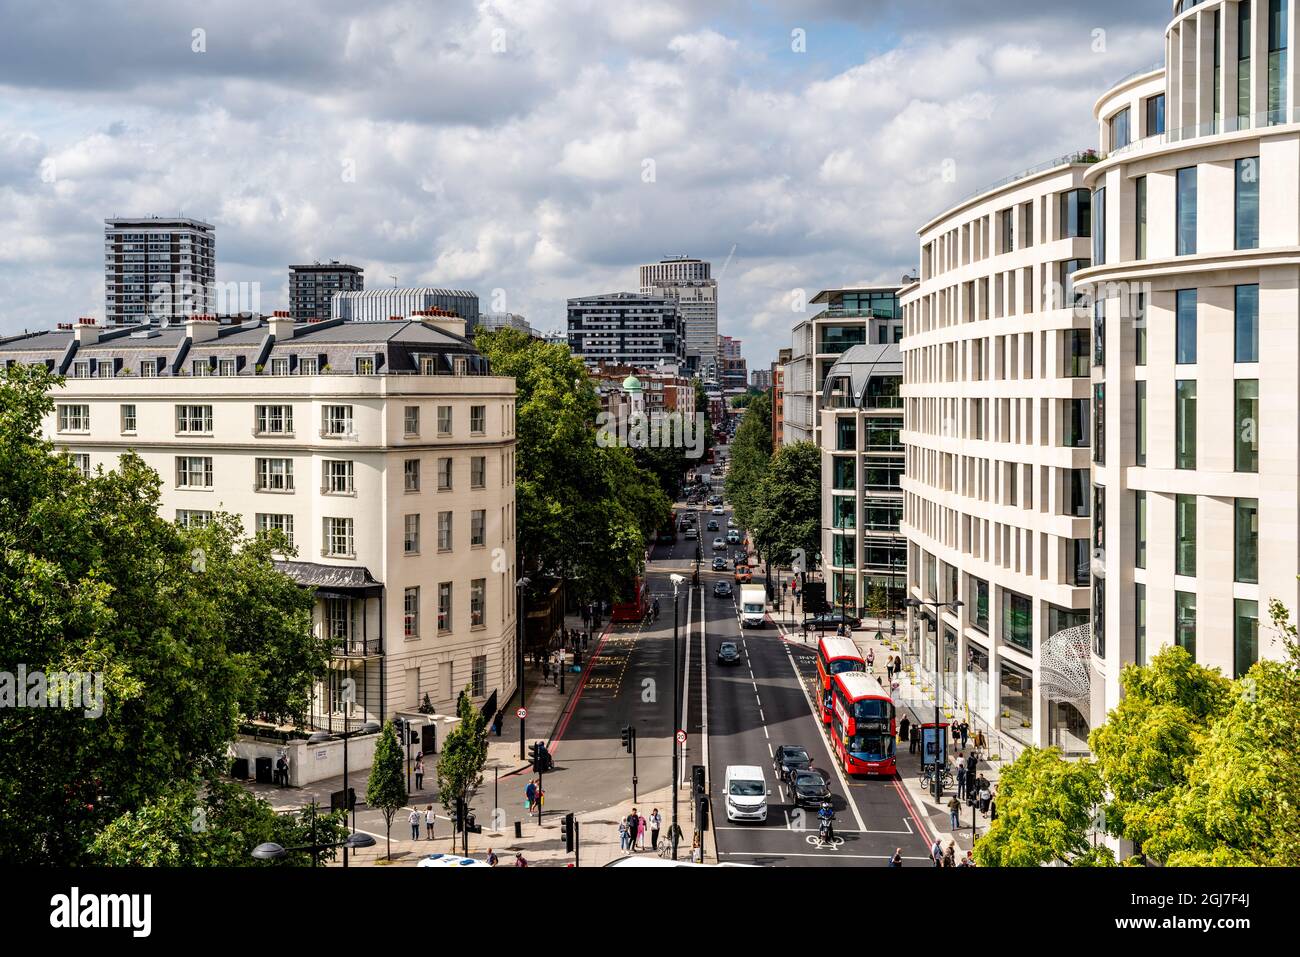 An Elevated View Of The Edgware Road From Marble Arch, London, UK. Stock Photo